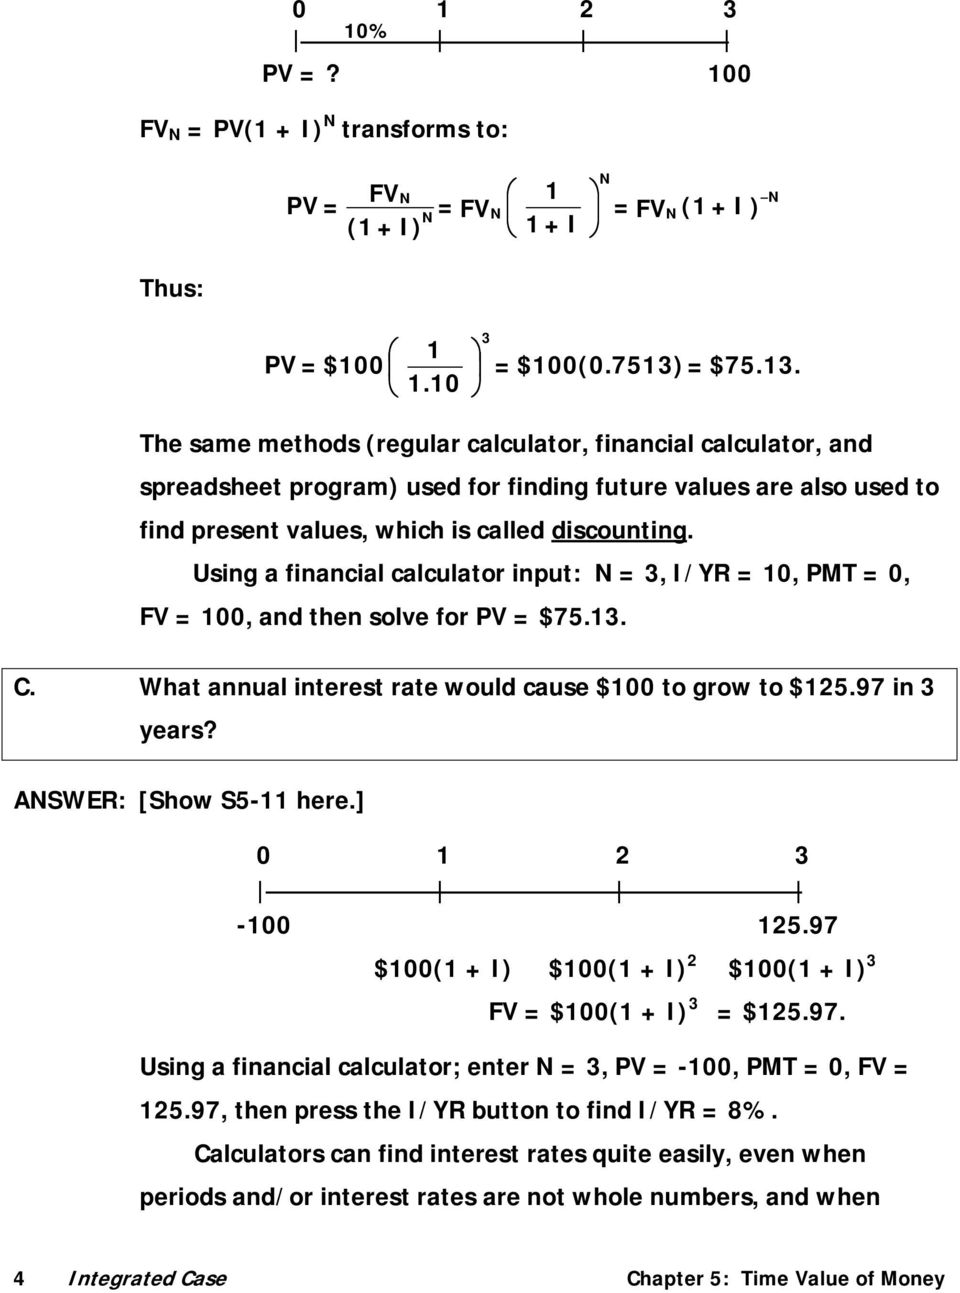 Using a financial calculator input: N = 3, I/YR = 10, PMT = 0, FV = 100, and then solve for PV = $75.13. C. What annual interest rate would cause $100 to grow to $125.97 in 3 years?